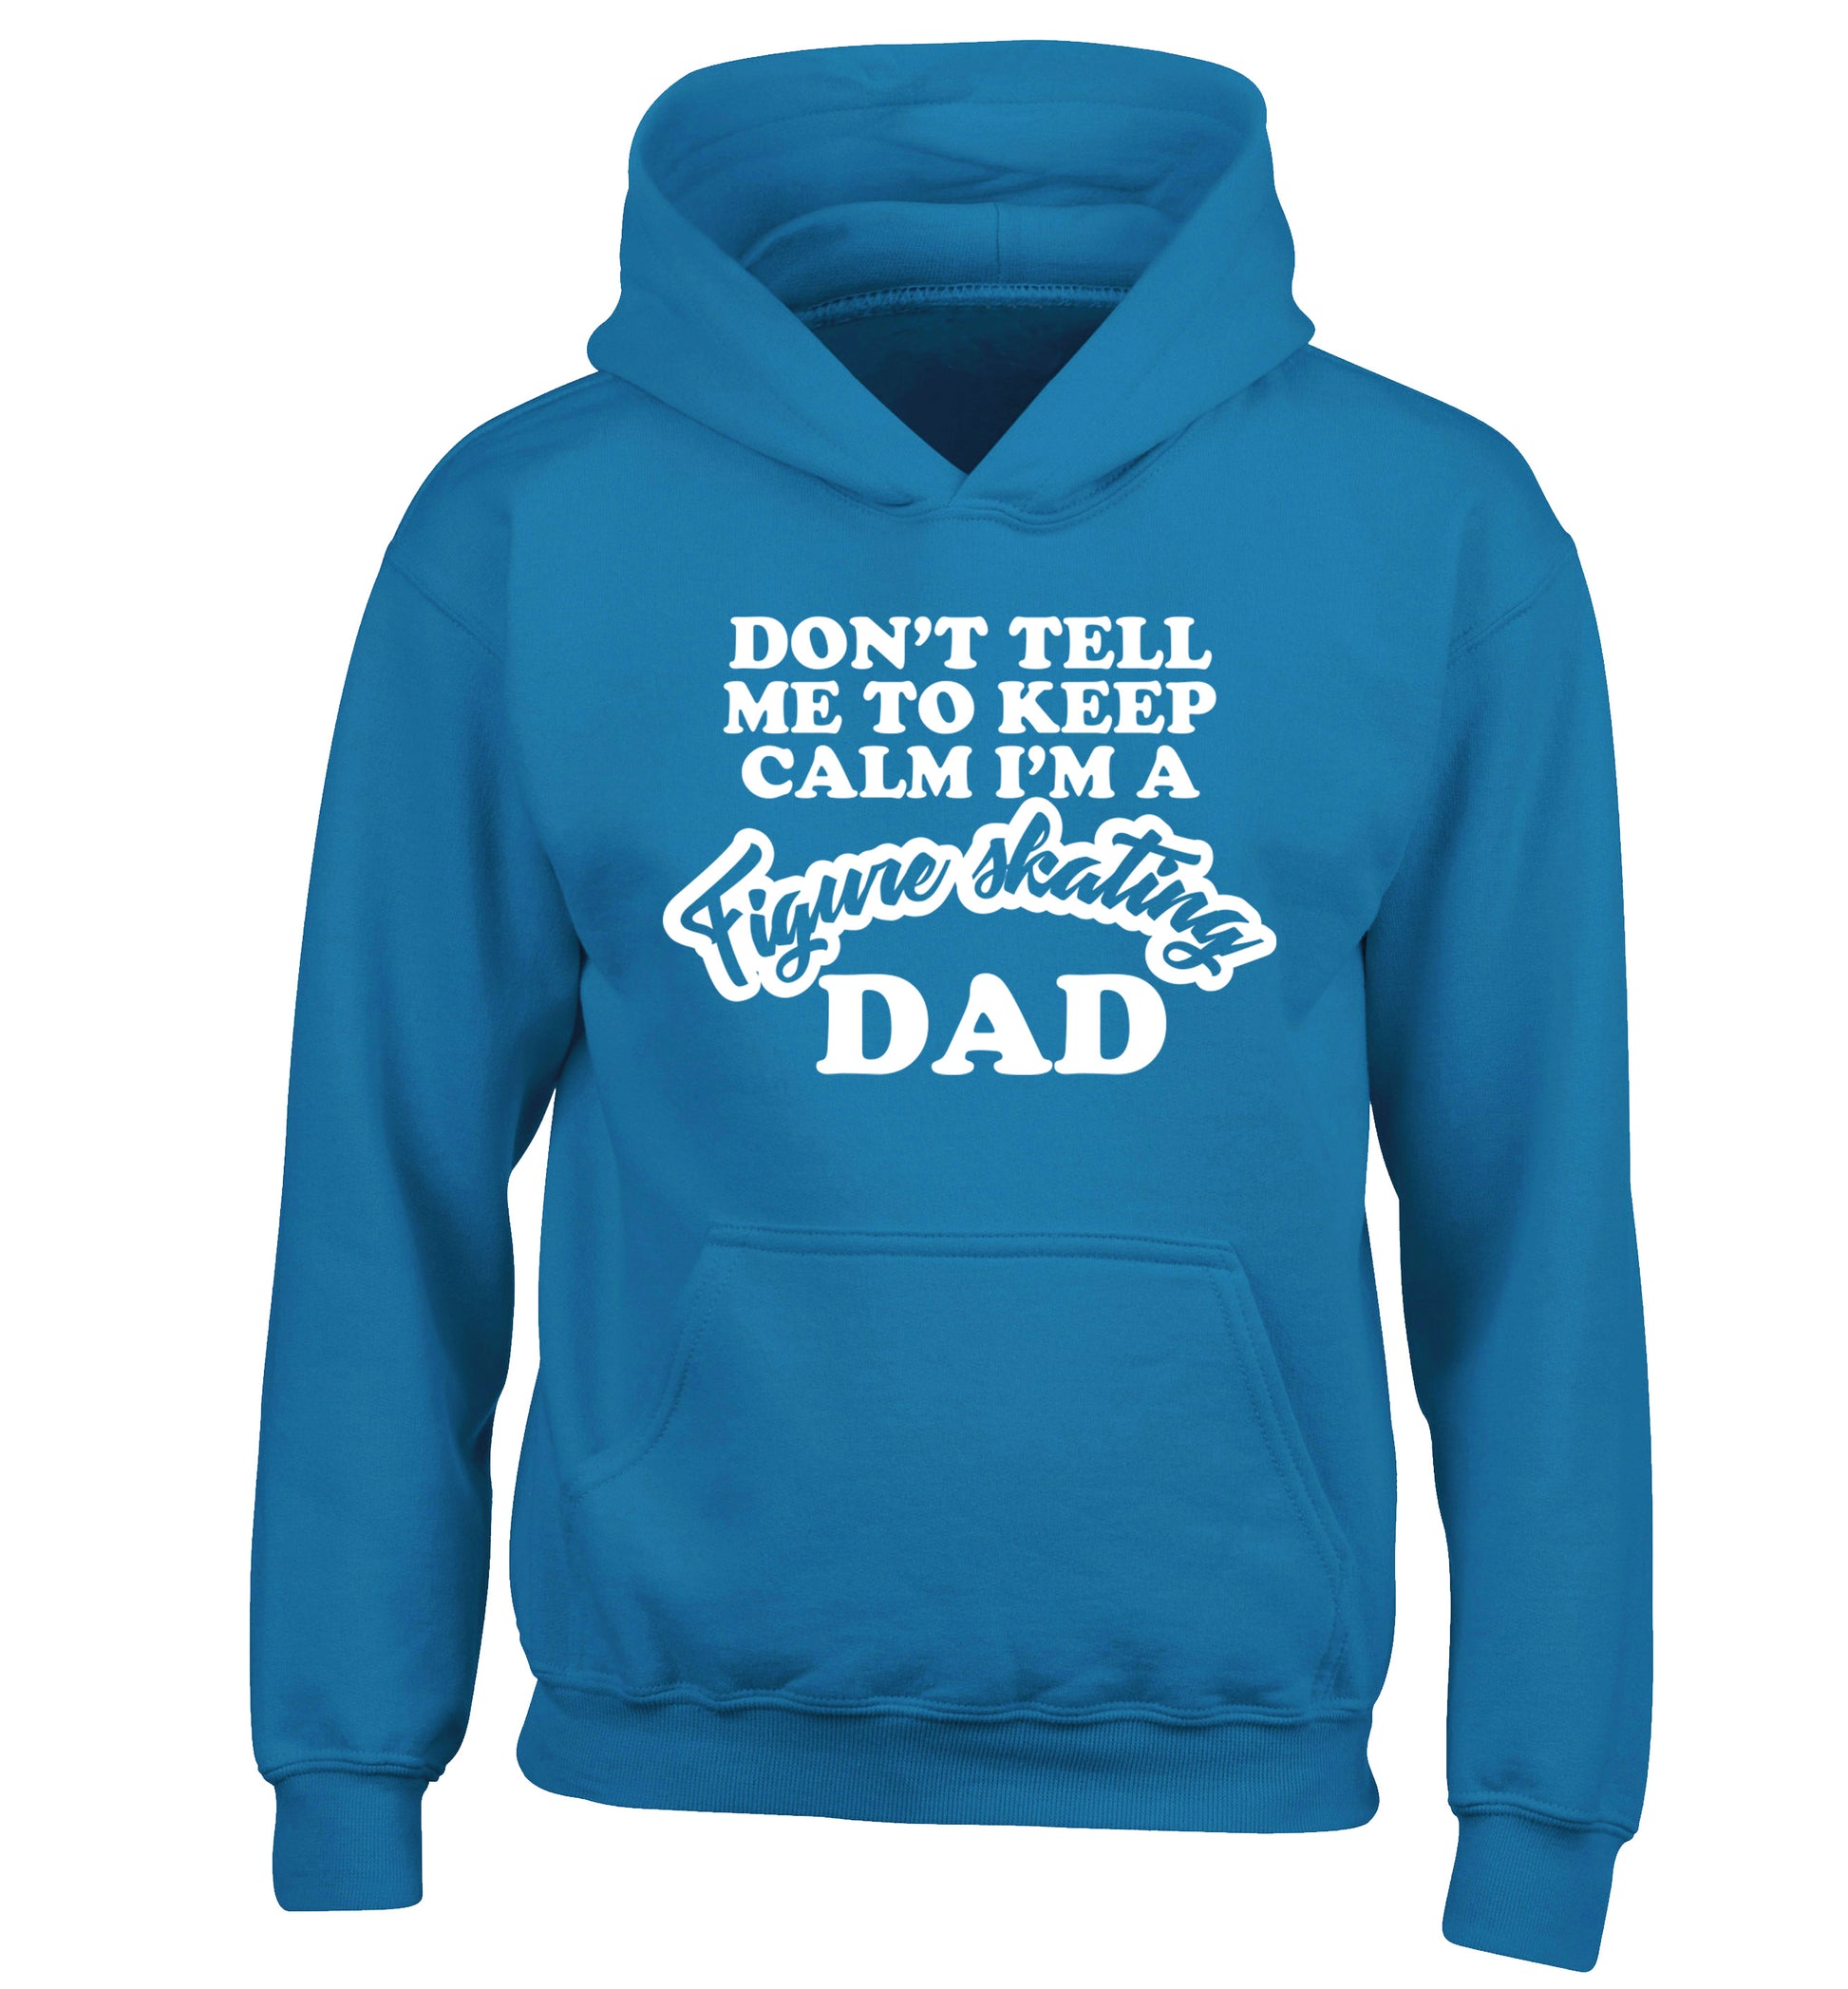 Don't tell me to keep calm I'm a figure skating dad children's blue hoodie 12-14 Years